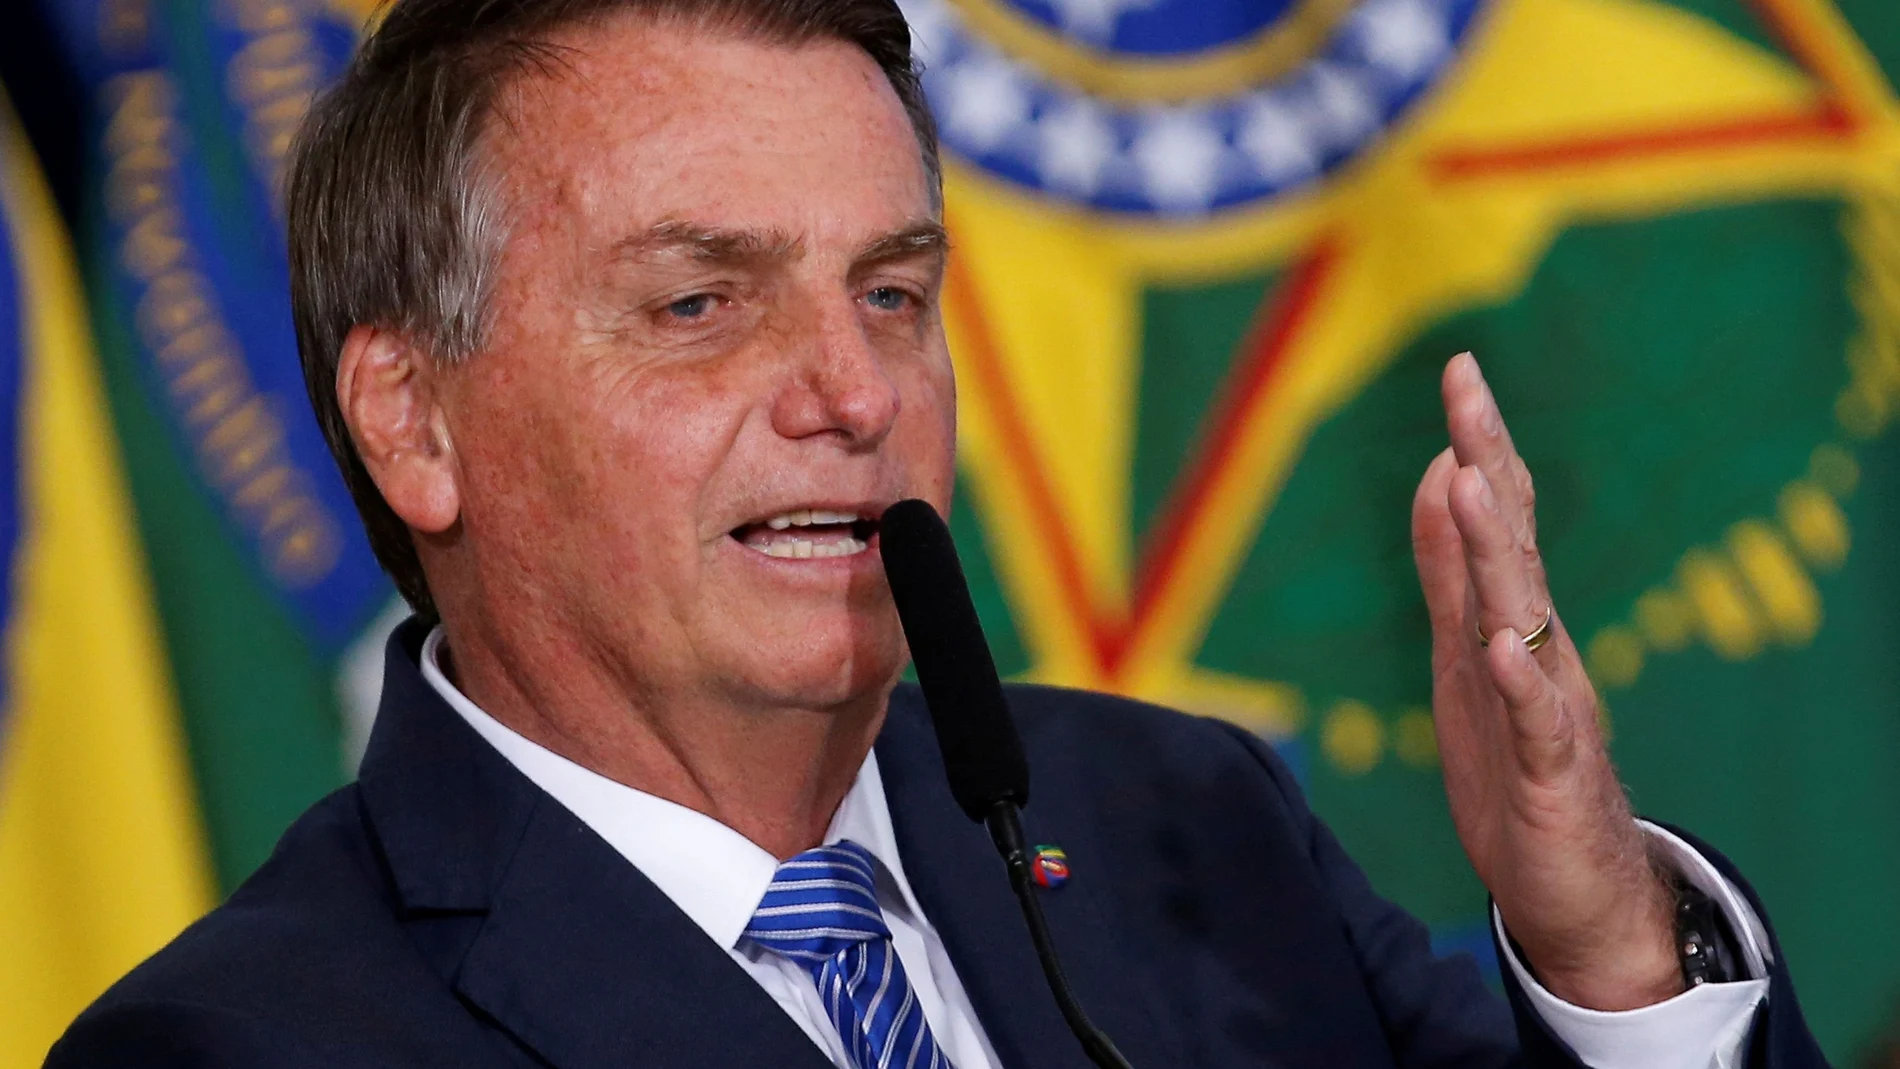 Brazil's President Jair Bolsonaro speaks during the inauguration ceremony of his new chief of staff at the Planalto Palace in Brasilia, Brazil August 4, 2021. REUTERS/Adriano Machado